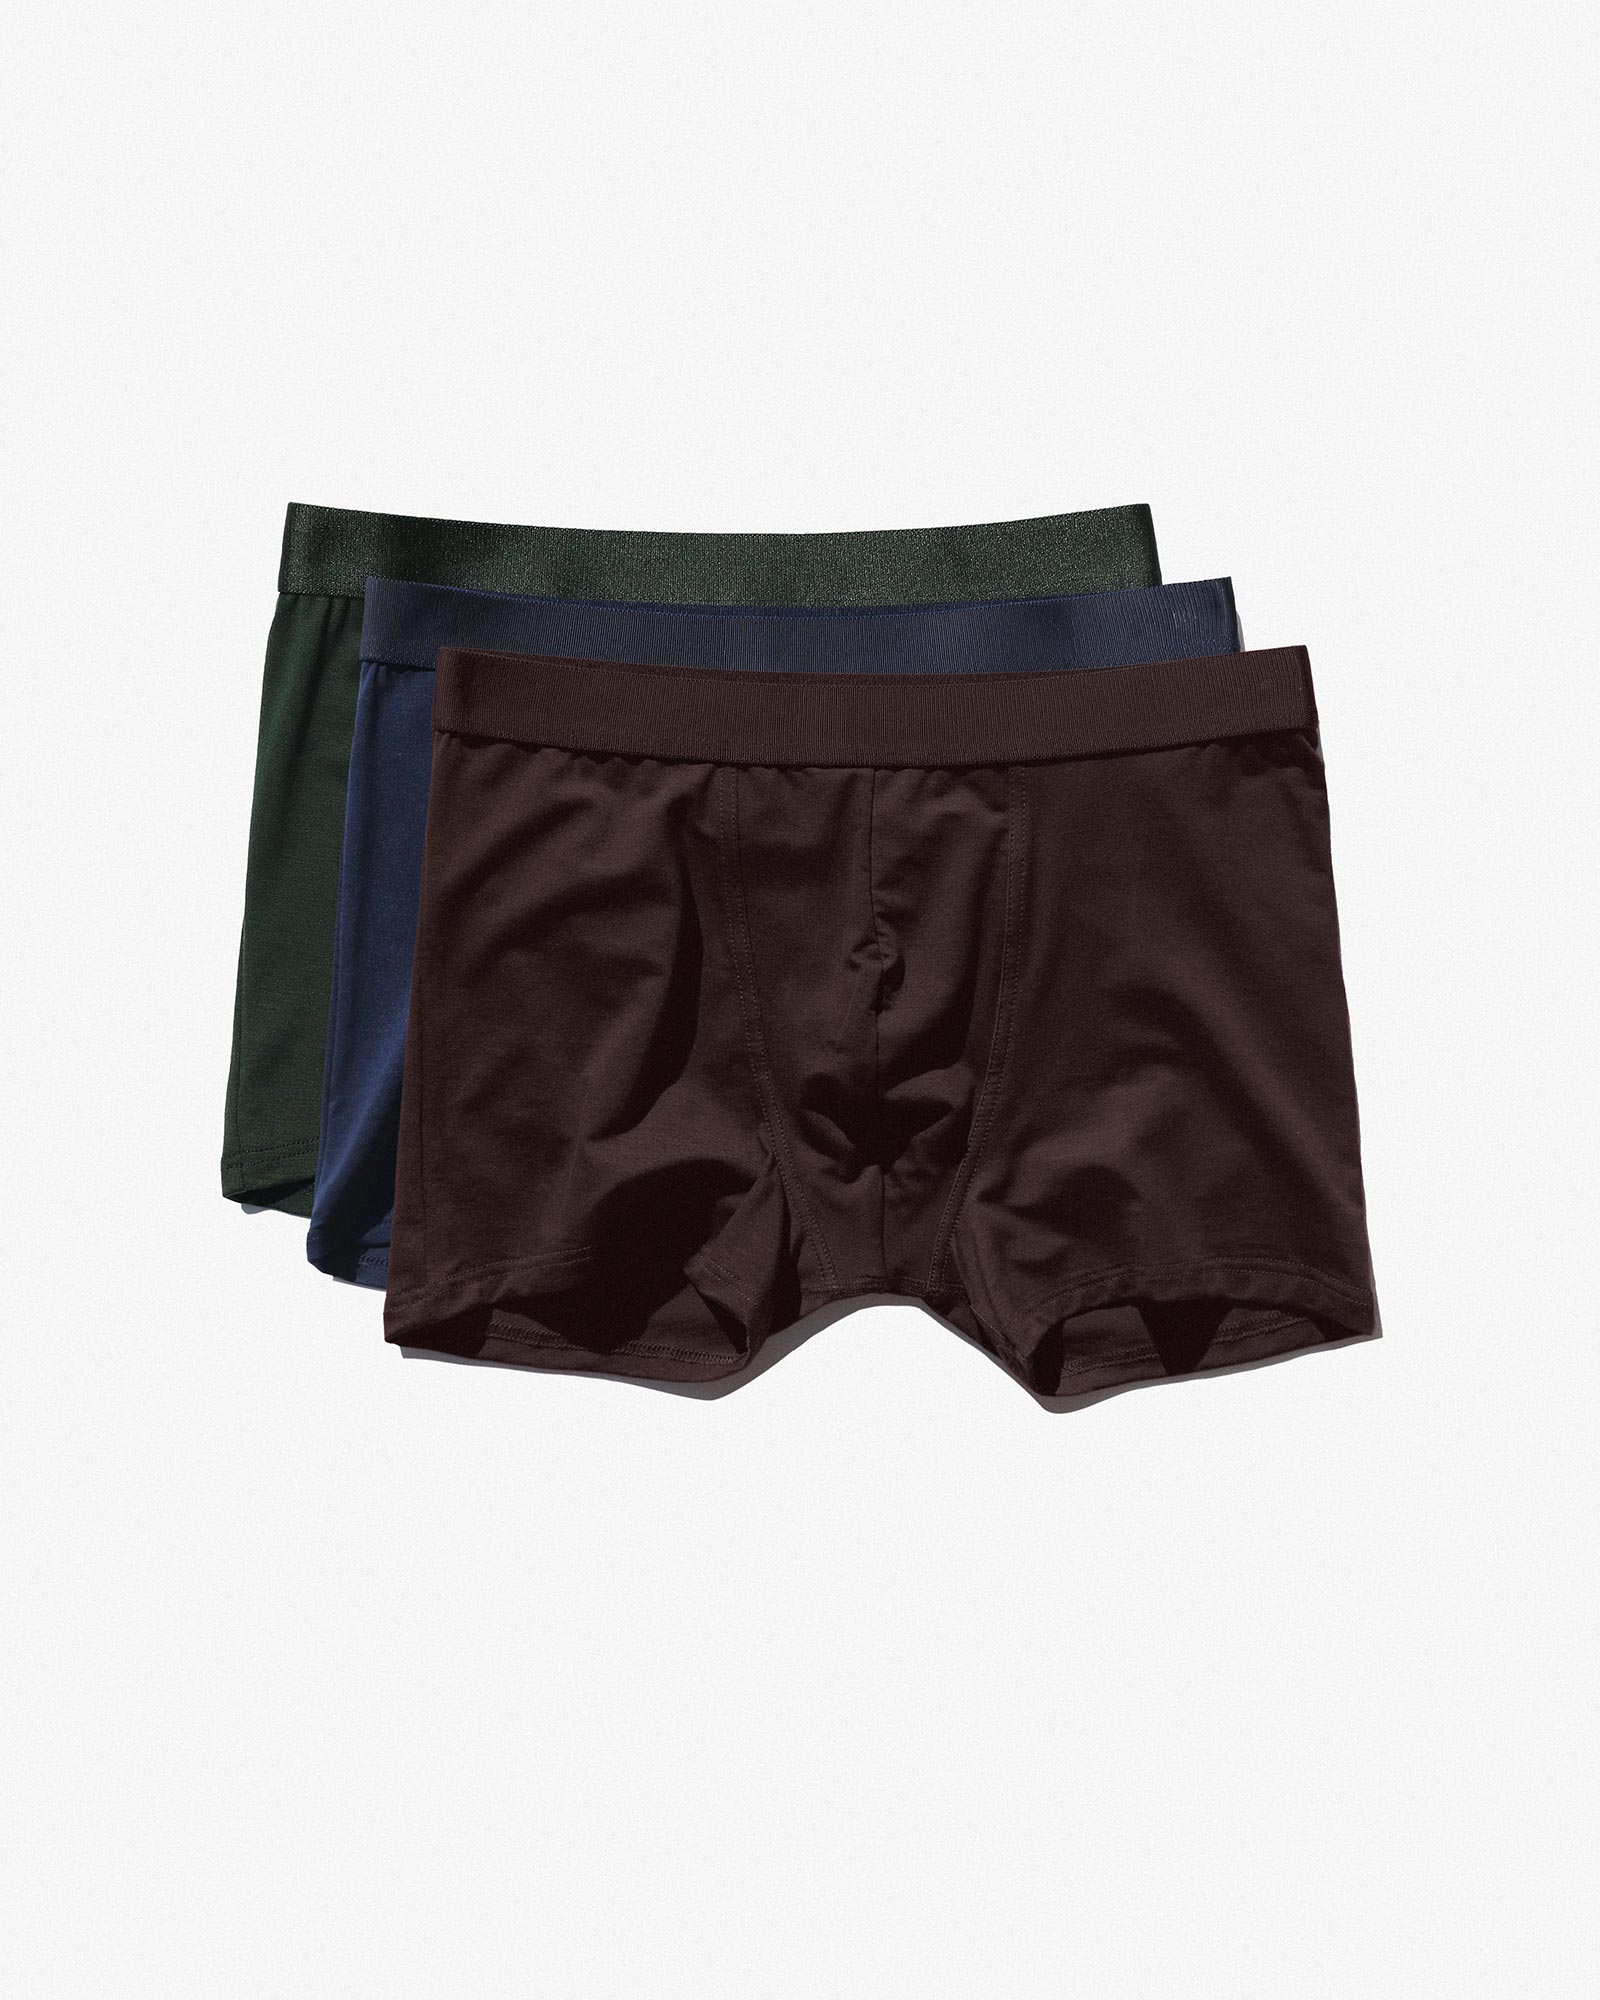 3 × Boxer Brief in Navy + Army Green + Brown | Shop now – CDLP